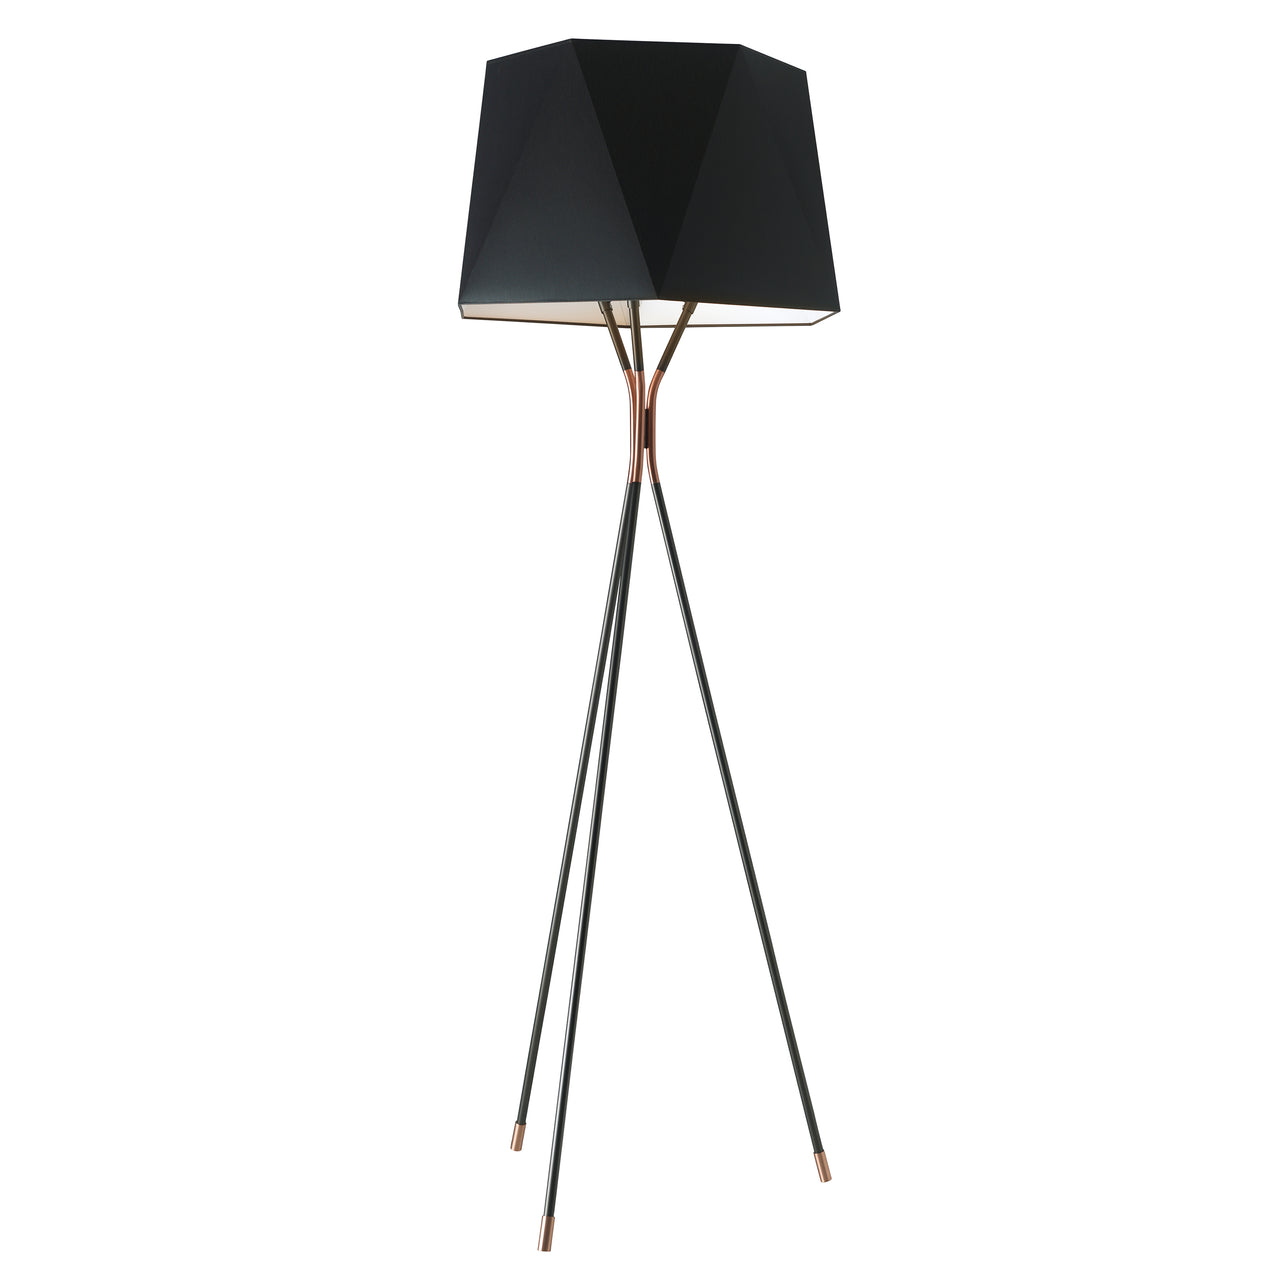 Solitaire Floor Lamp: Extra Large - 72.8